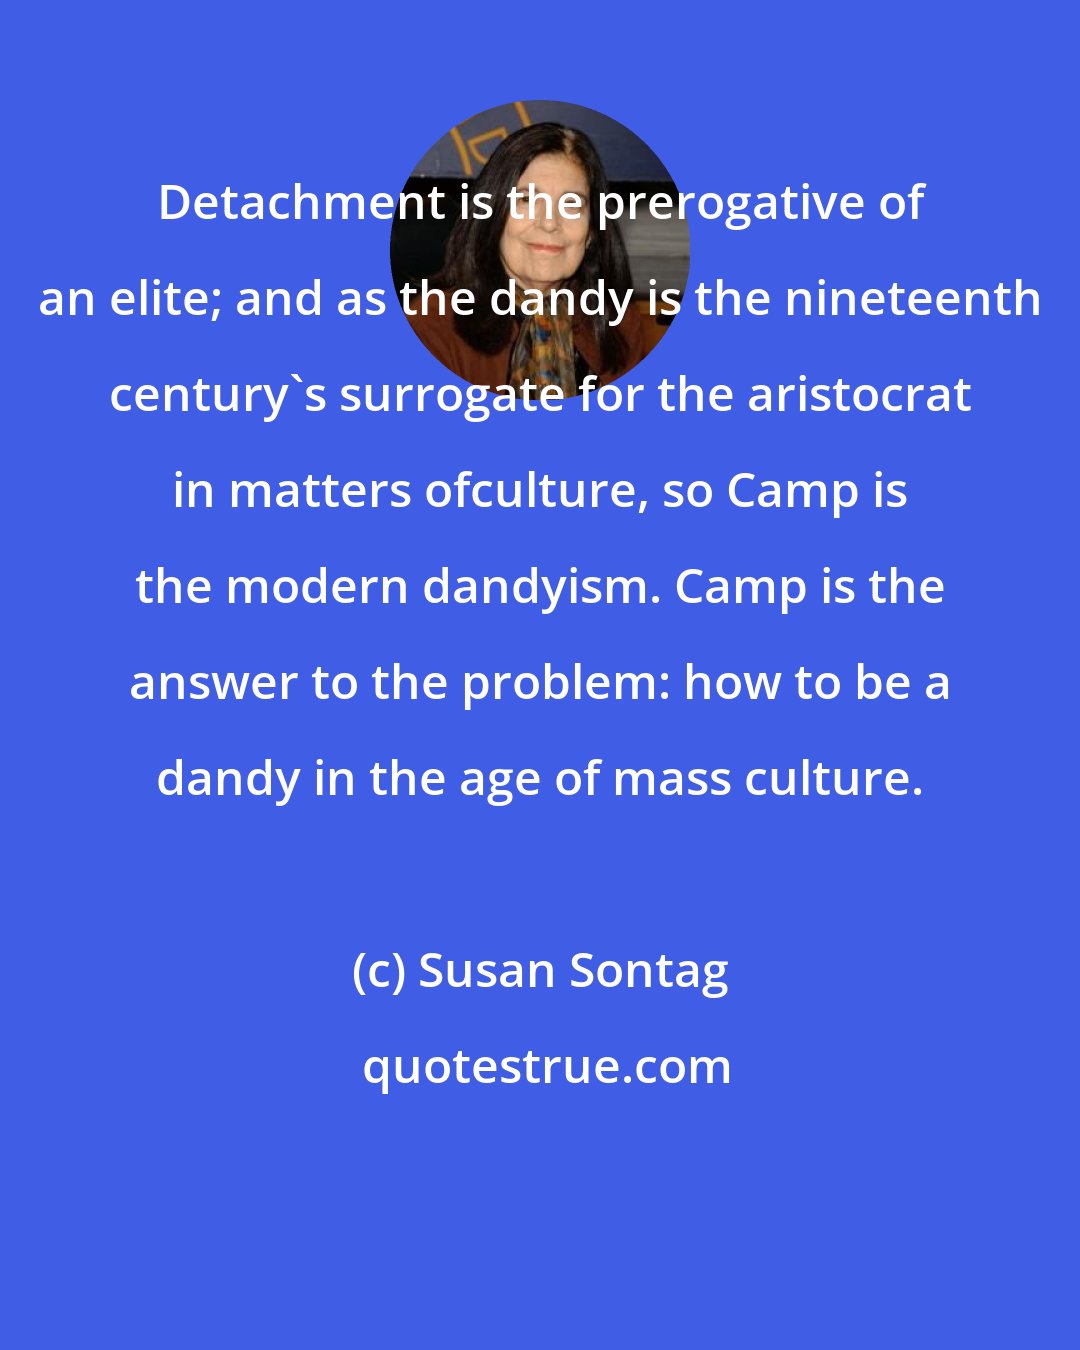 Susan Sontag: Detachment is the prerogative of an elite; and as the dandy is the nineteenth century's surrogate for the aristocrat in matters ofculture, so Camp is the modern dandyism. Camp is the answer to the problem: how to be a dandy in the age of mass culture.